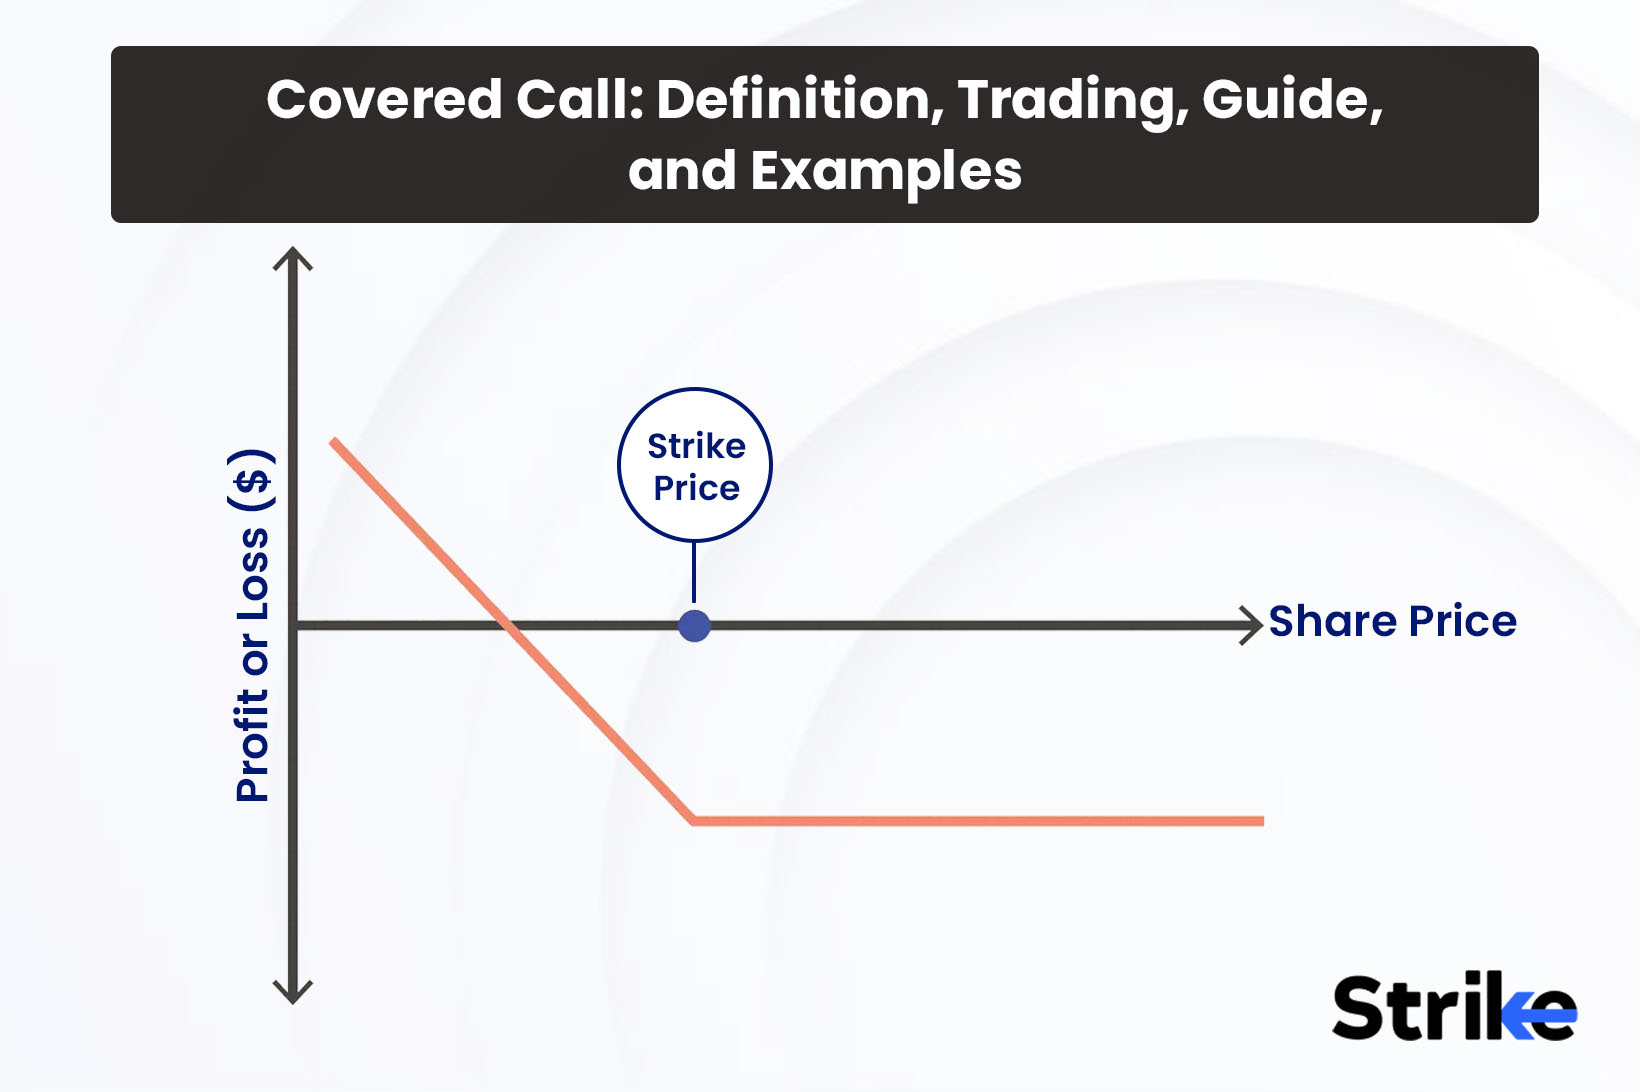 Covered Call: Definition, Trading Guide, and Examples